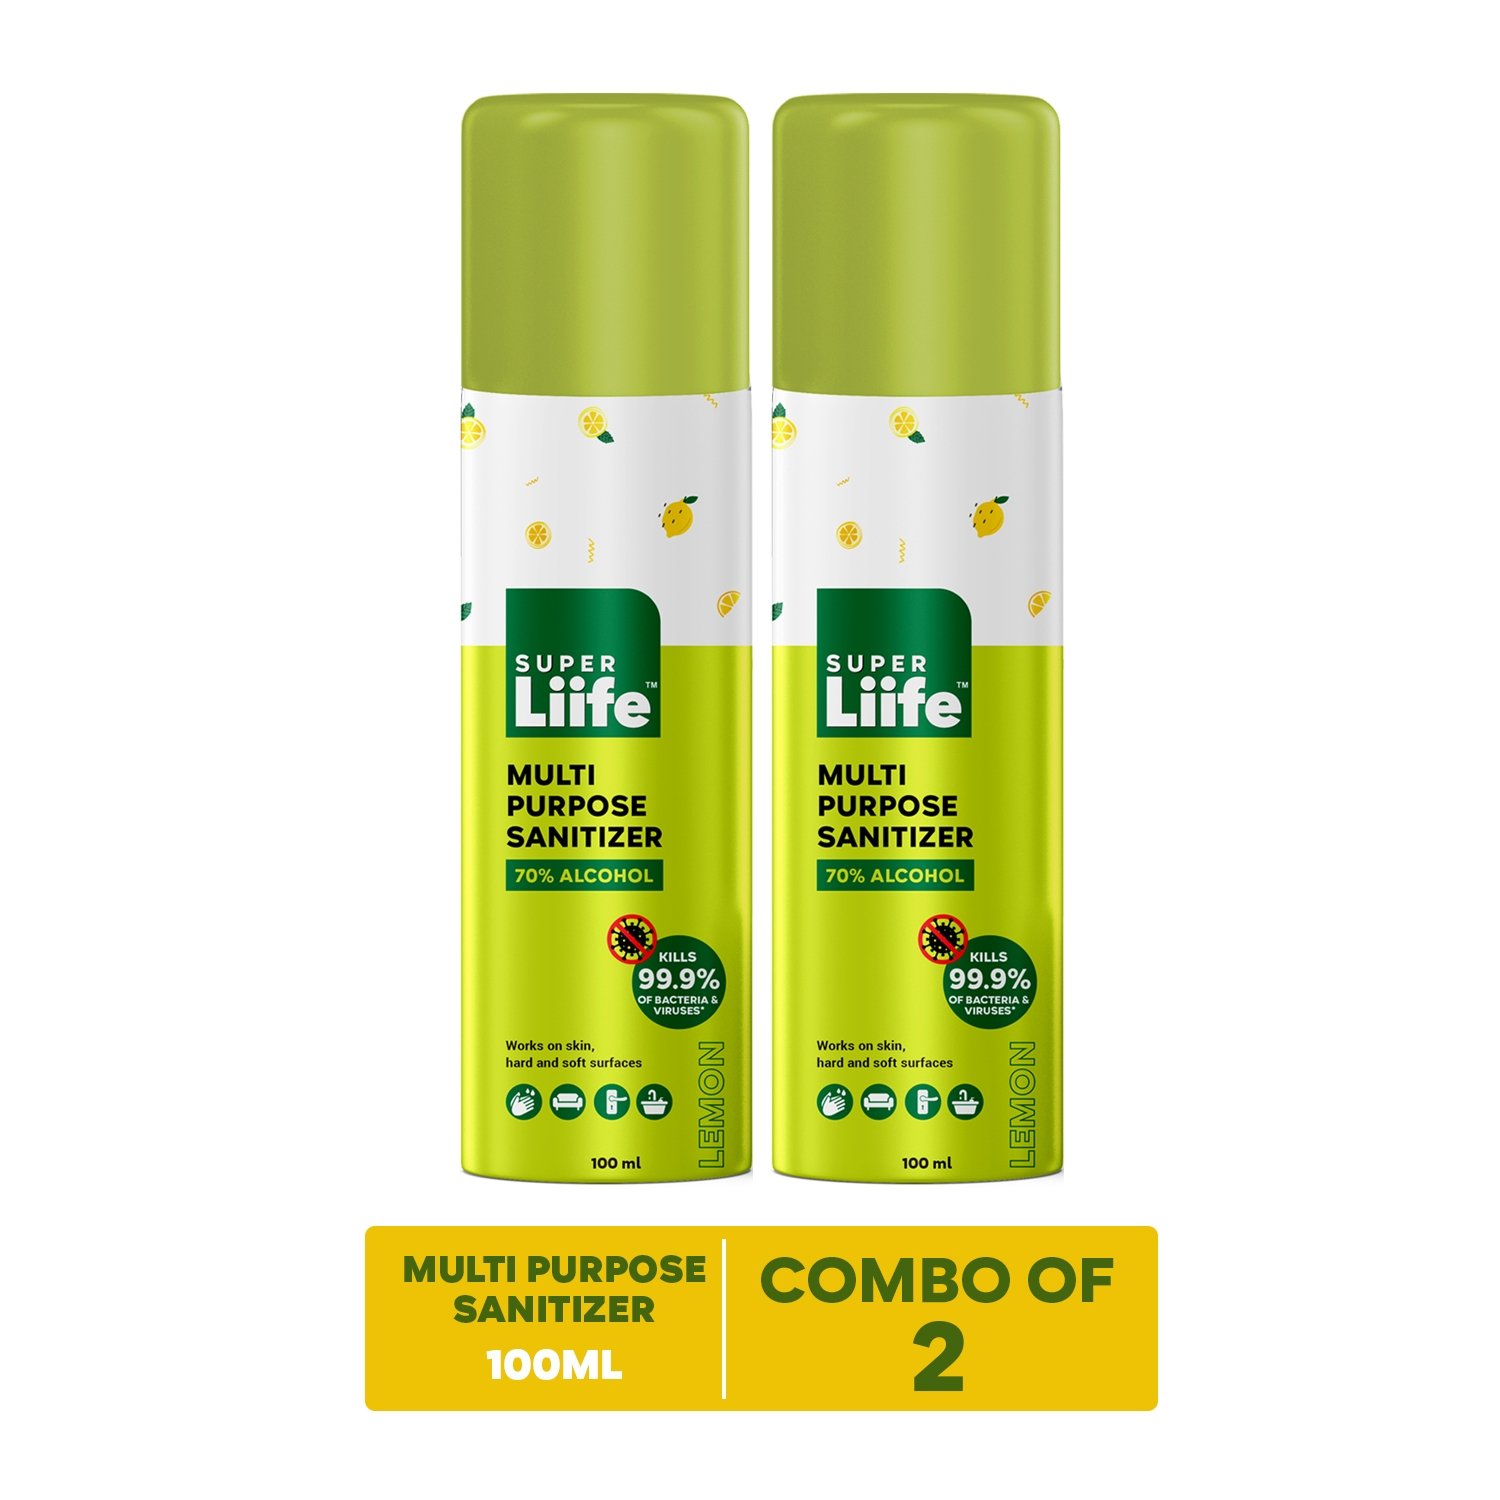 Super Liife | Super Liife Multi Purpose Sanitizer (100ml), Germ Protection On Skin, Hard and Soft Surface - Pack of 2